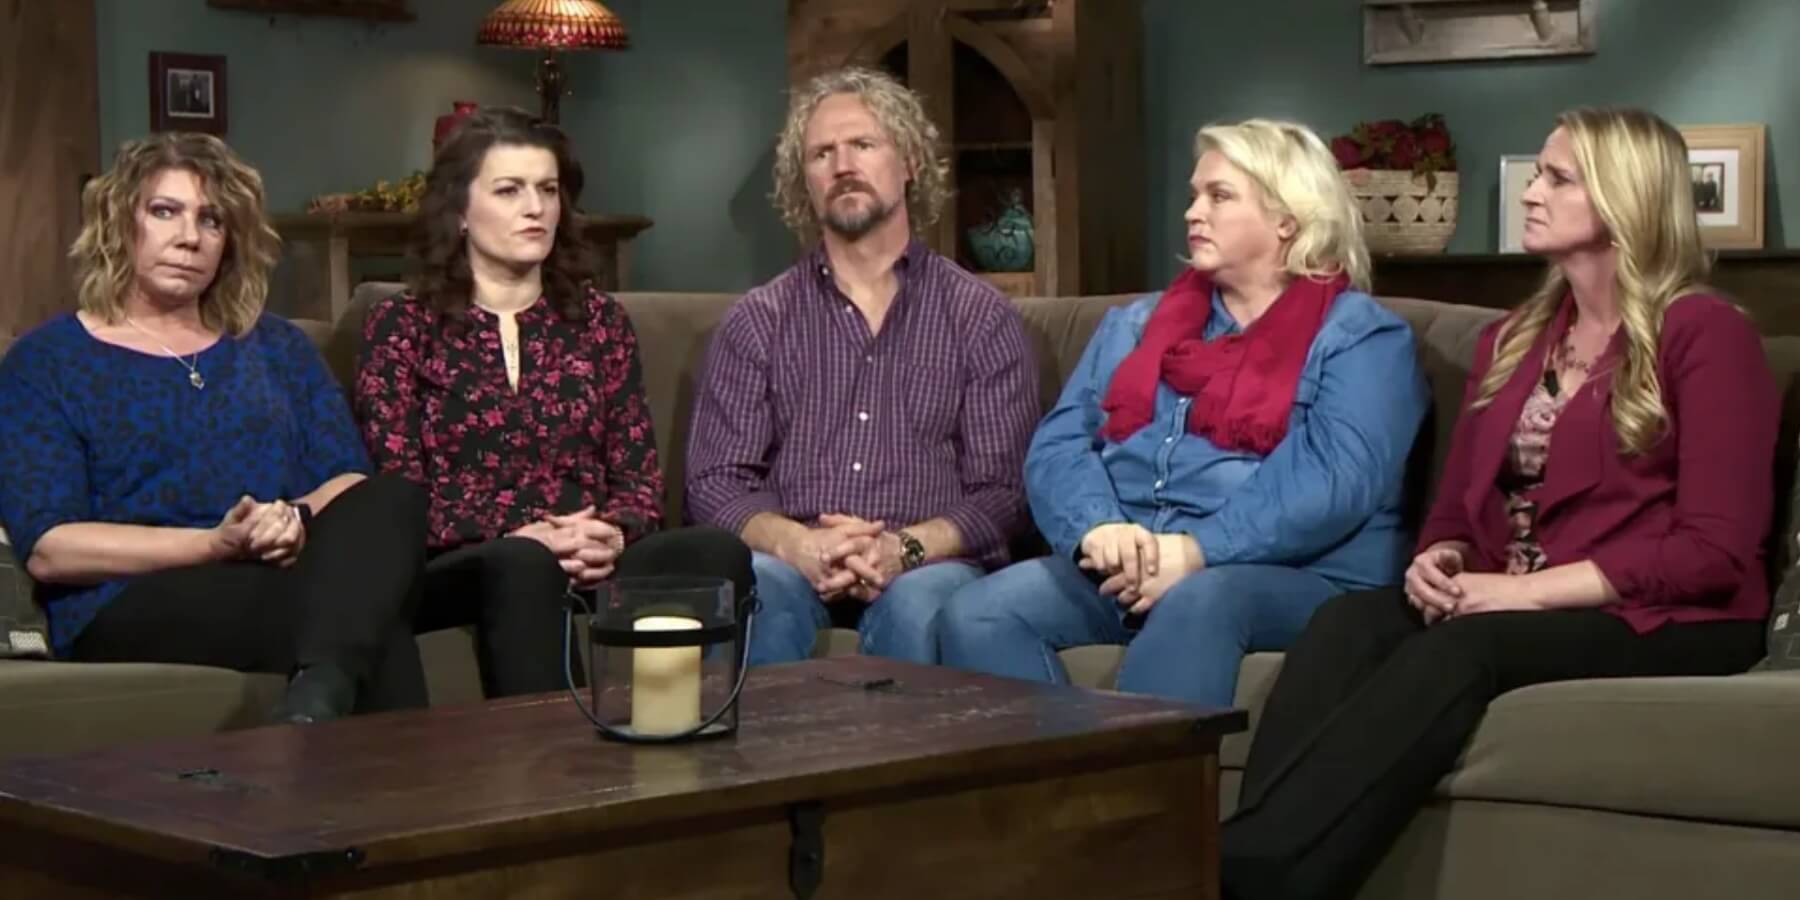 The 'Sister Wives' cast includes Meri, Robyn, Kody, Janelle, and Christine Brown